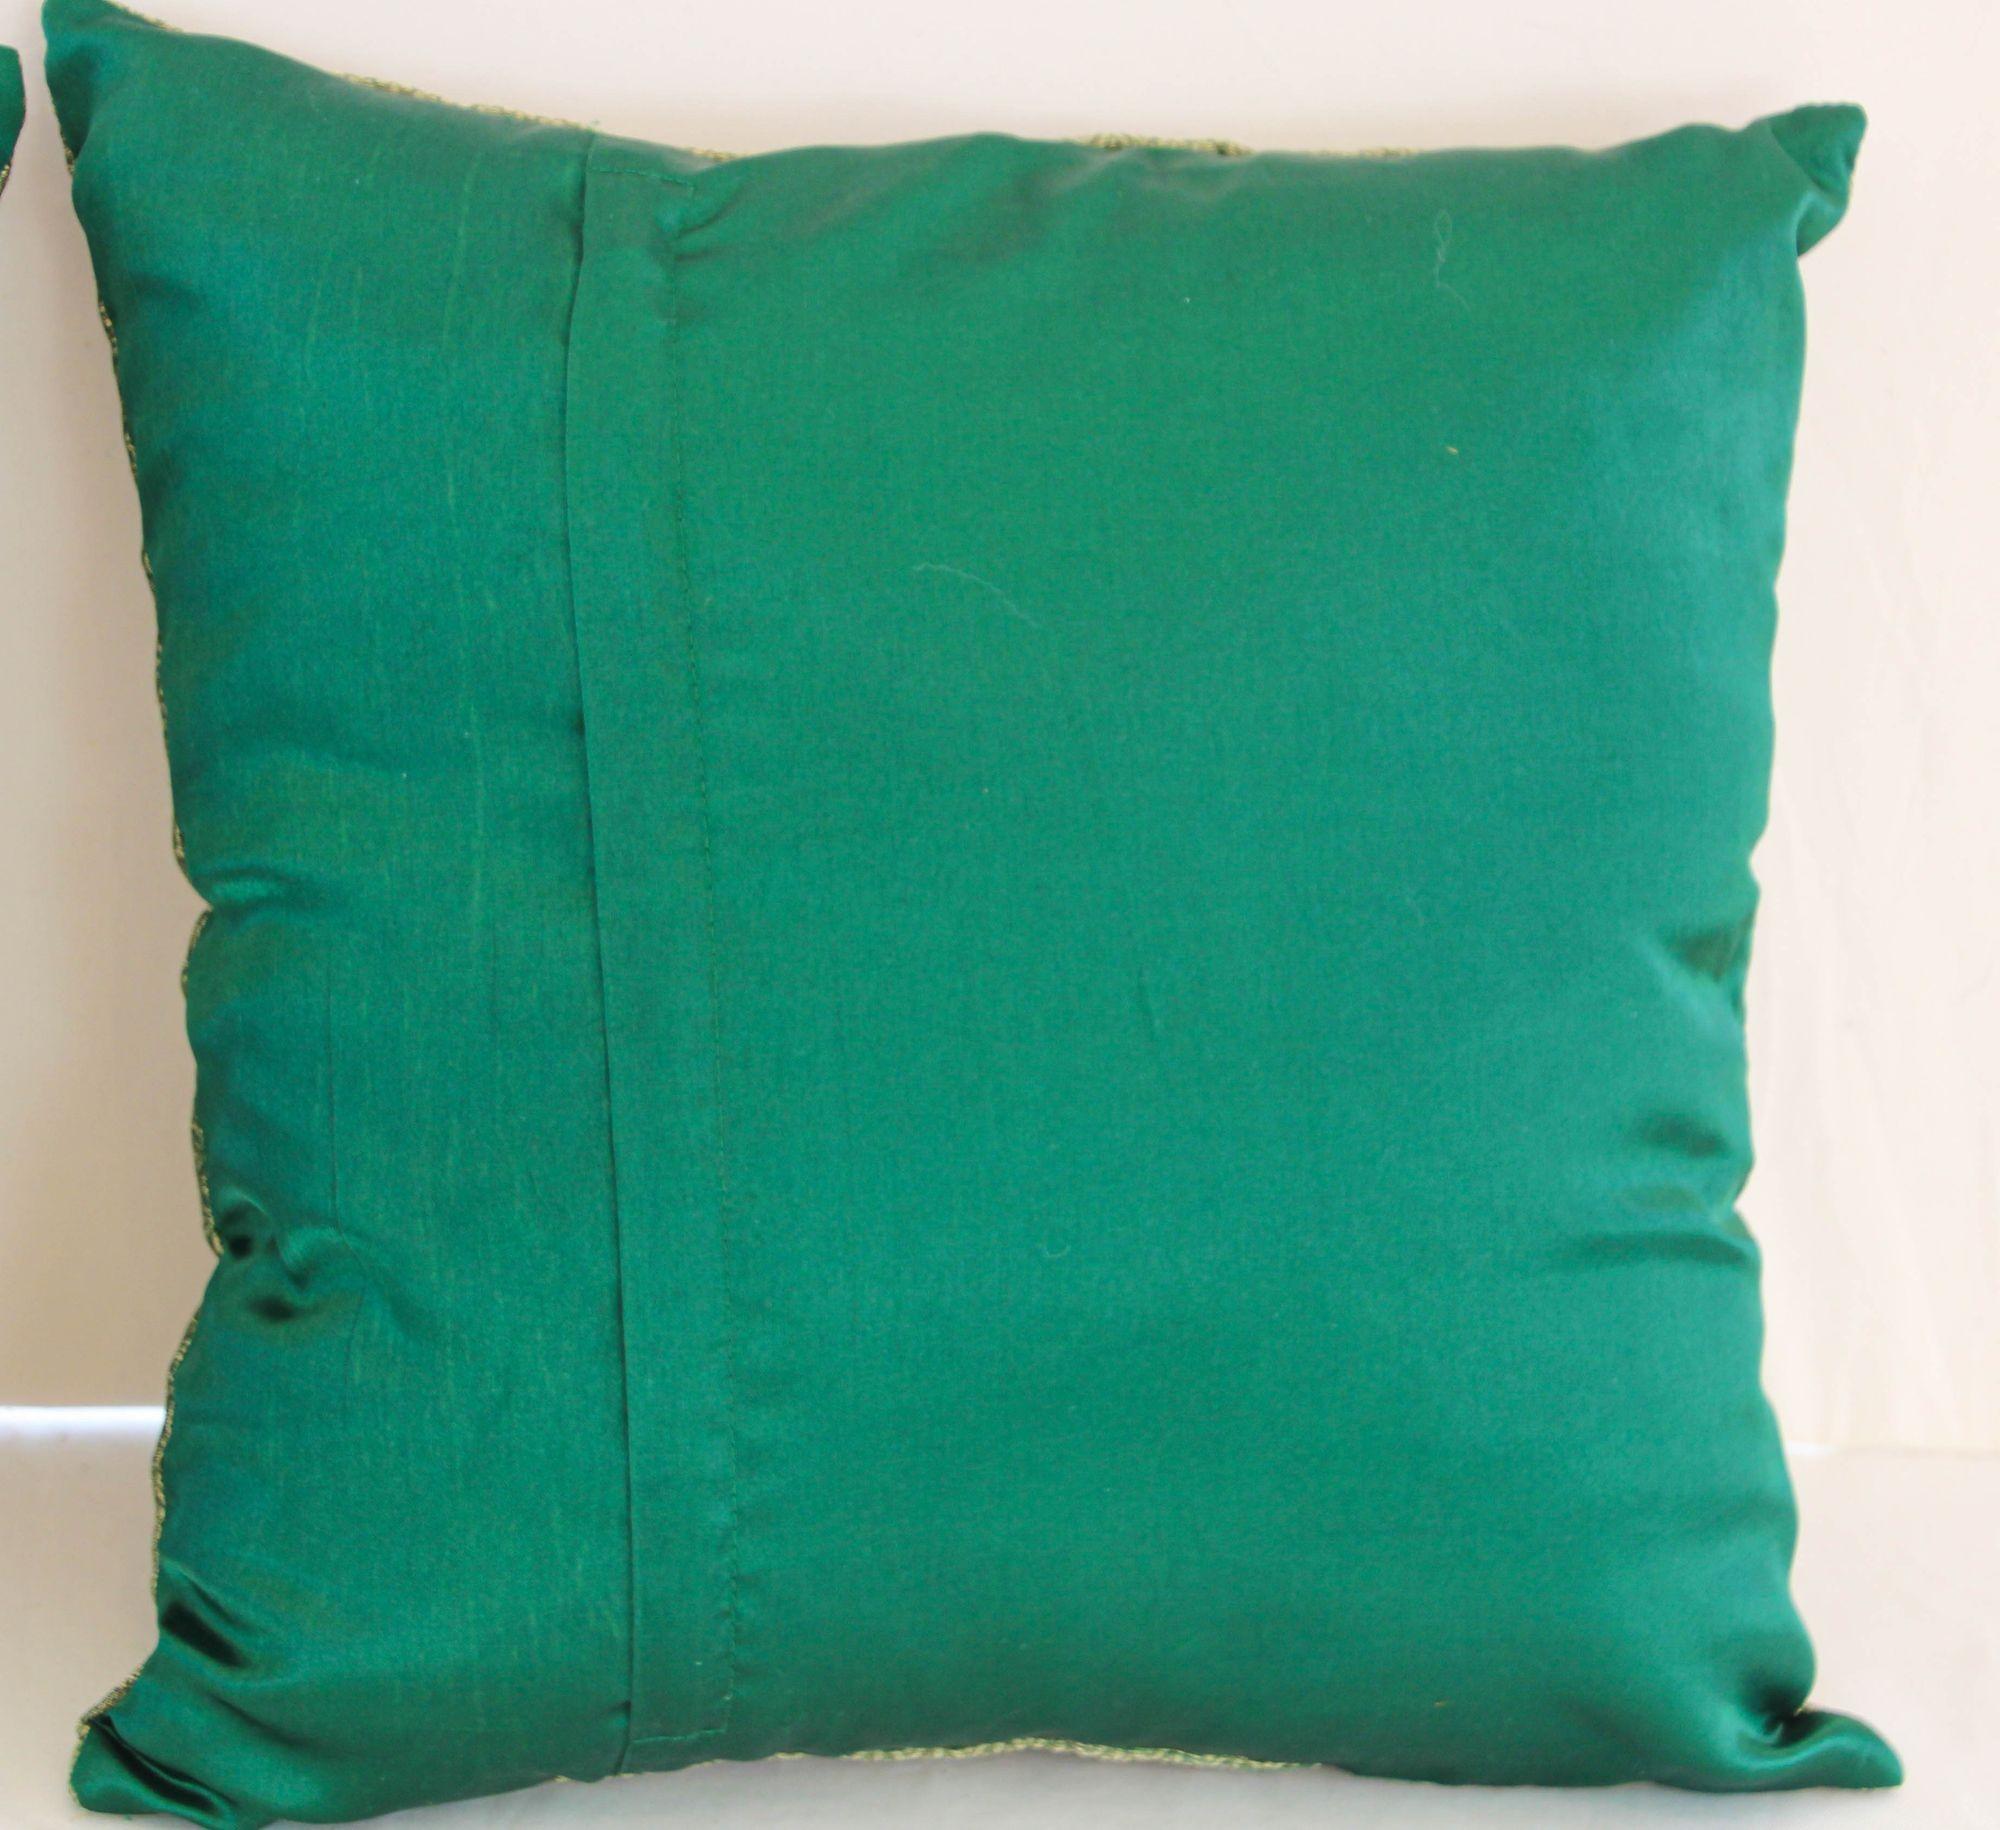 Fabric Emerald Green Moorish Throw Pillows Embellished with Sequins and Beads a Pair For Sale